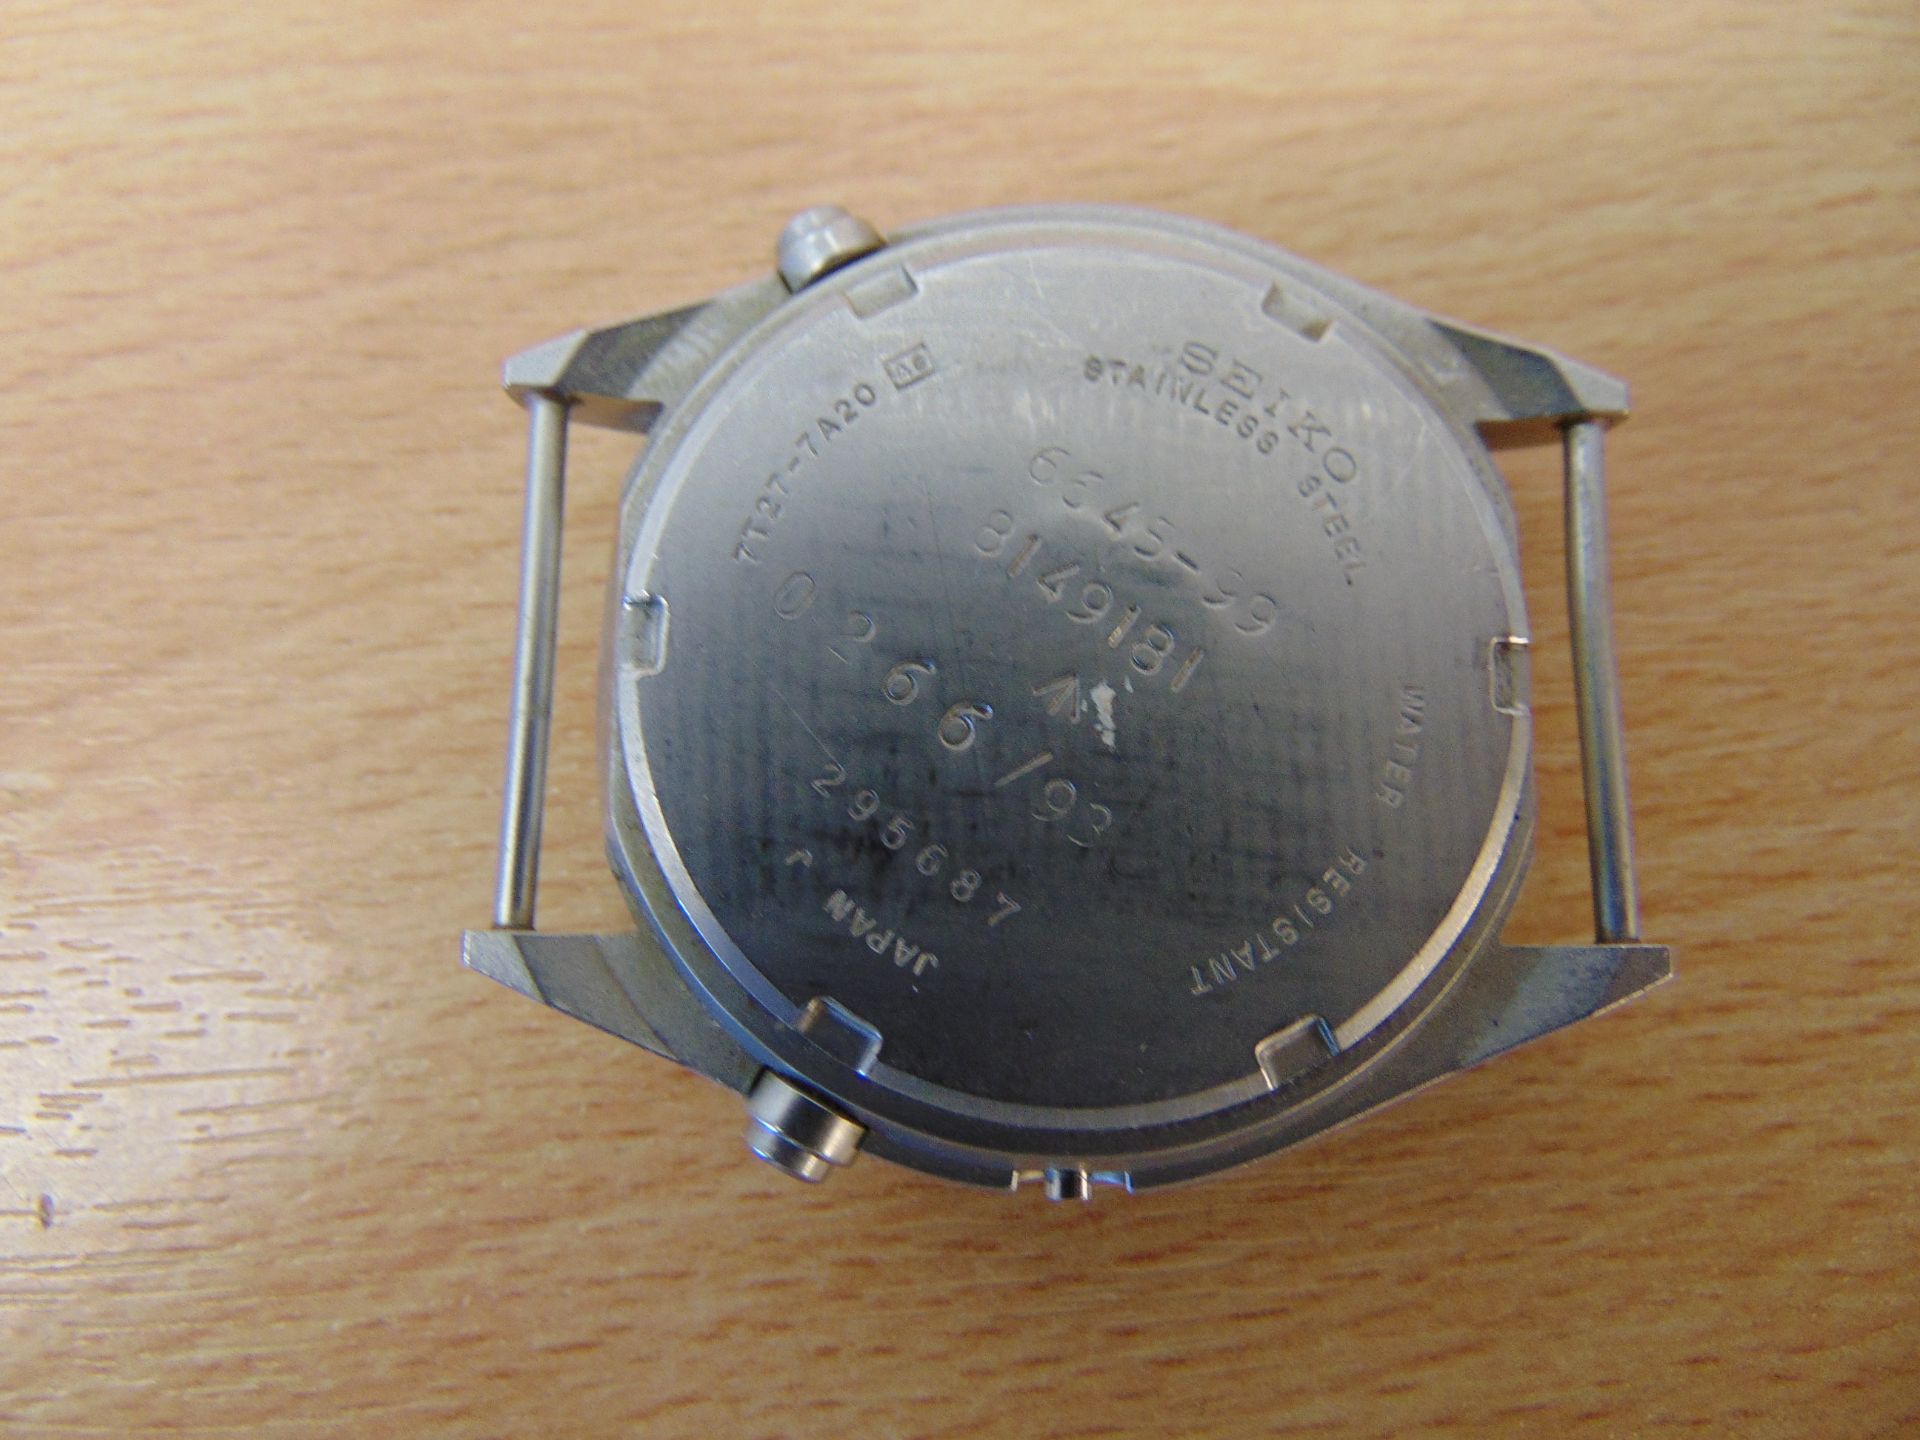 Seiko Gen 2 Pilots Chrono (with date), RAF Tornado force issue Nato marks Date 1993, - Image 3 of 4